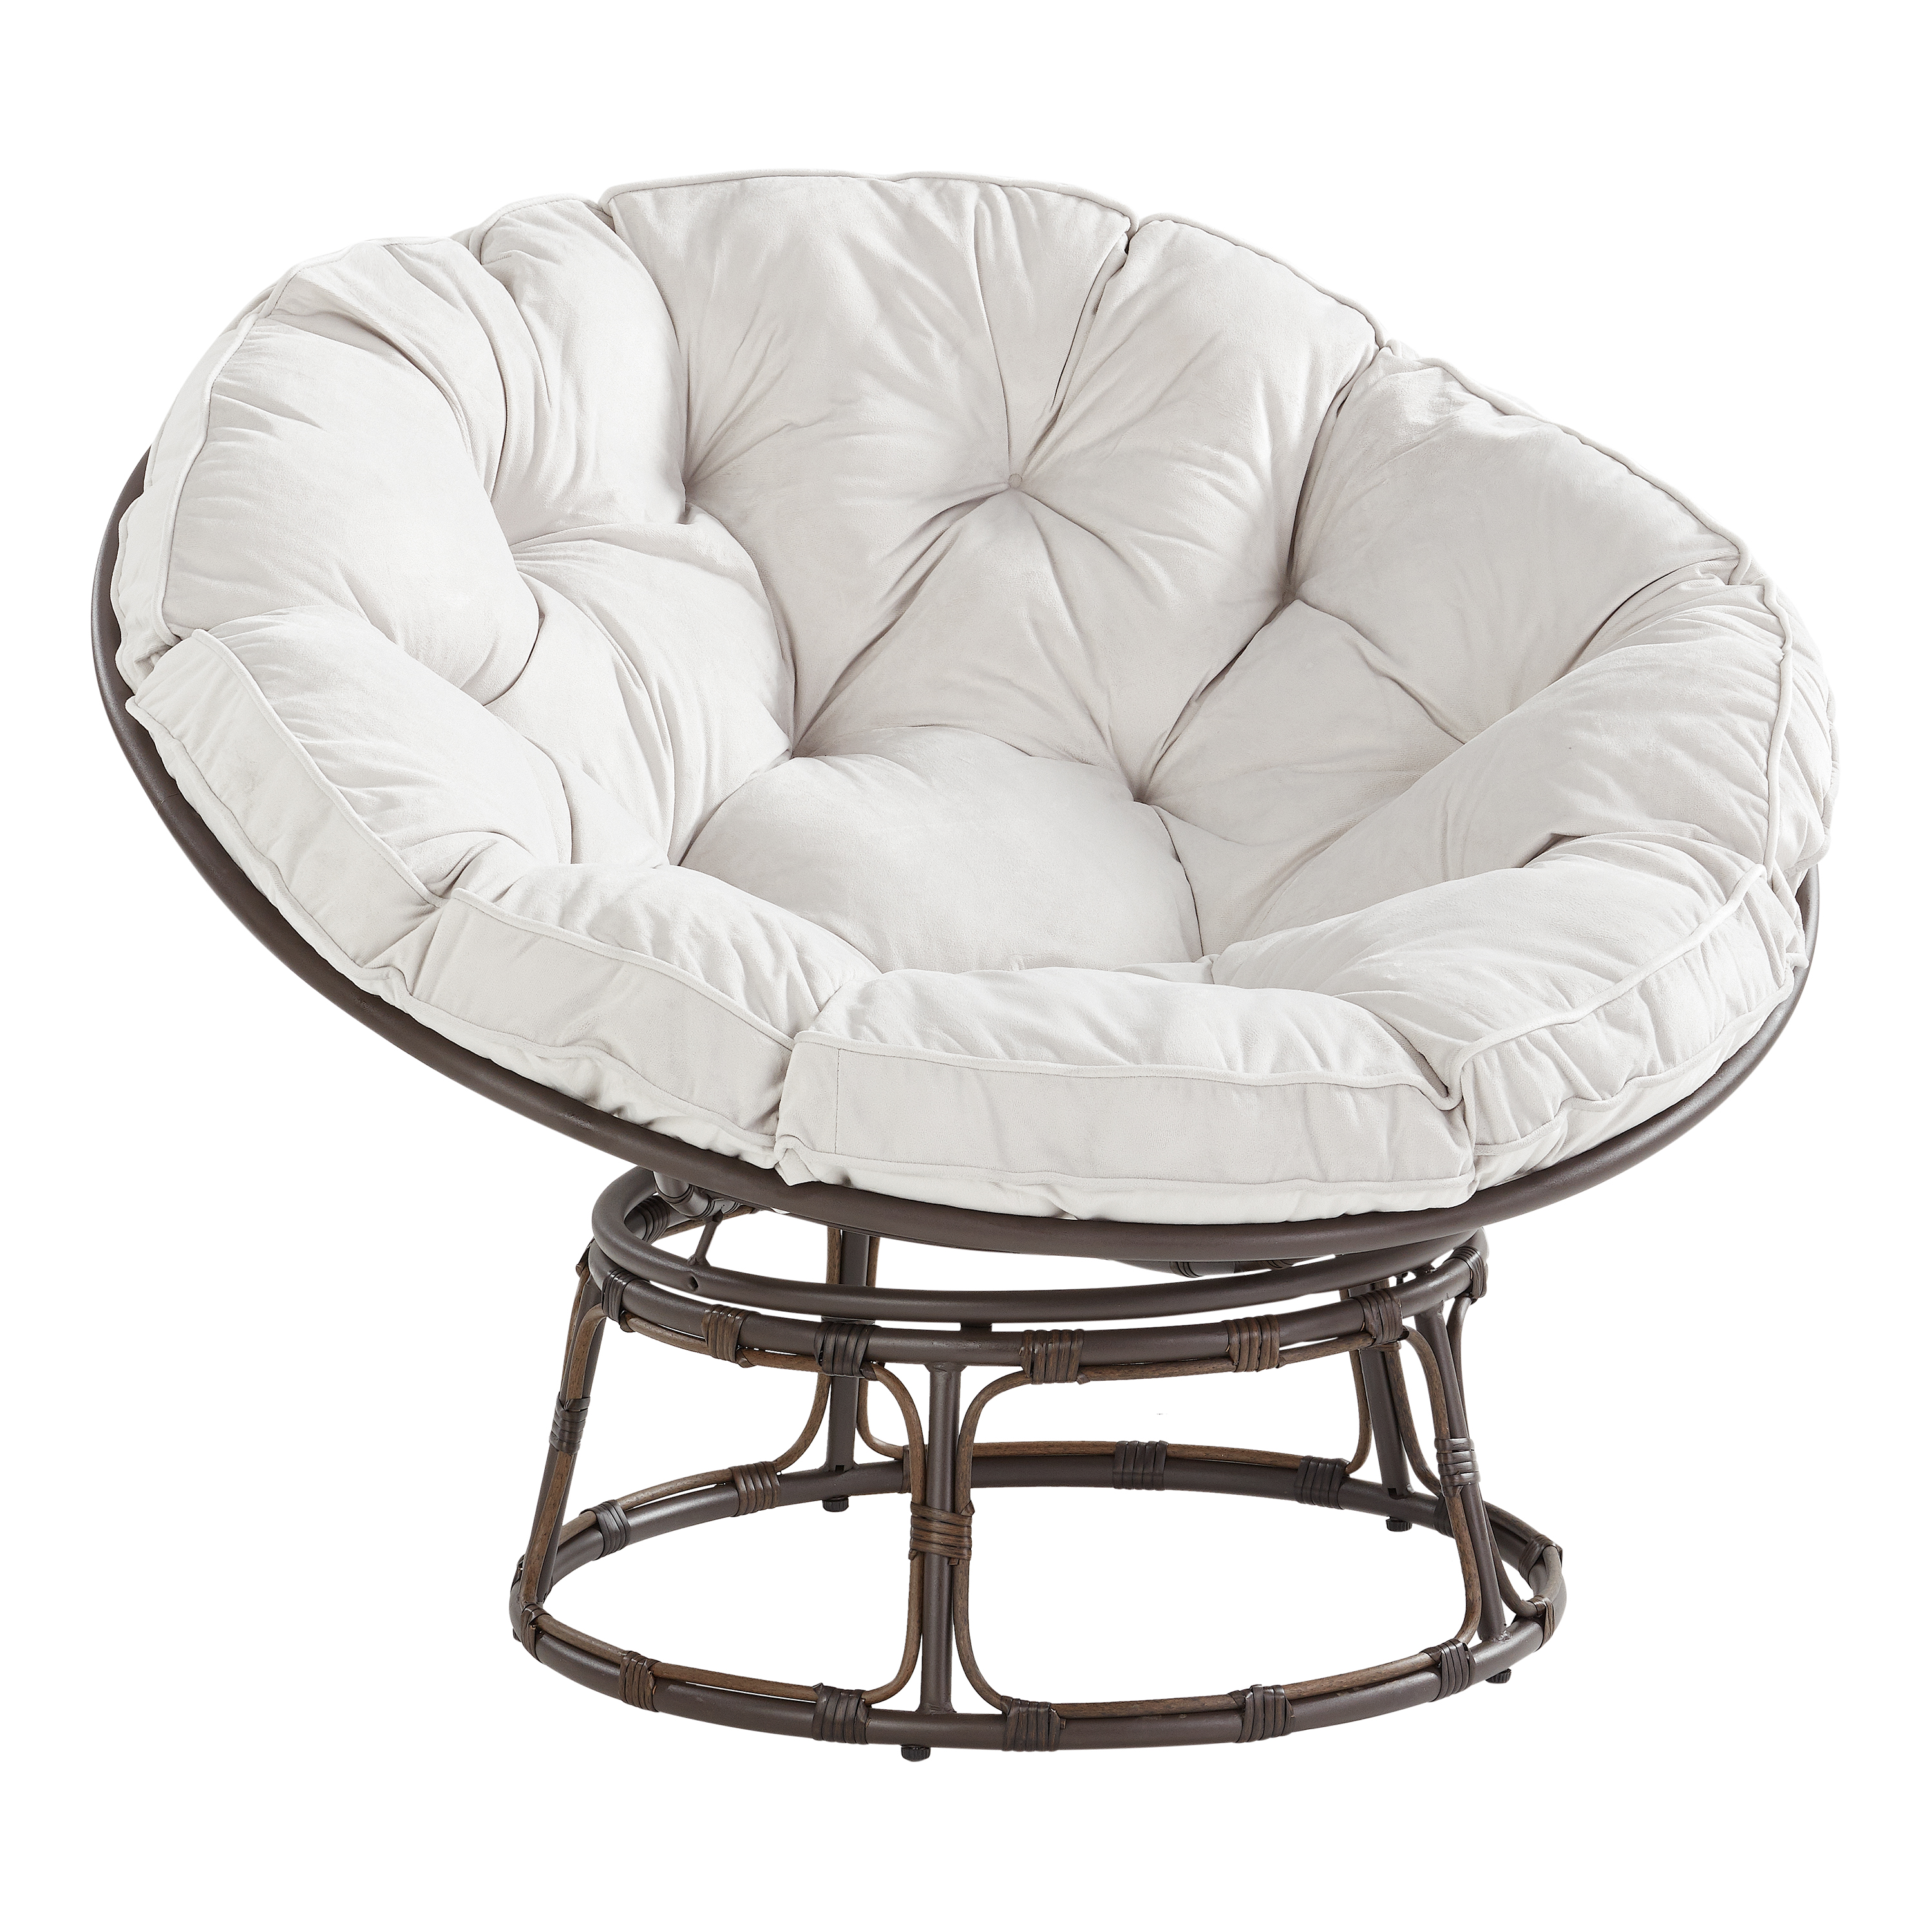 Better Homes & Gardens Papasan Chair with Fabric Cushion, Pumice Gray - image 3 of 5